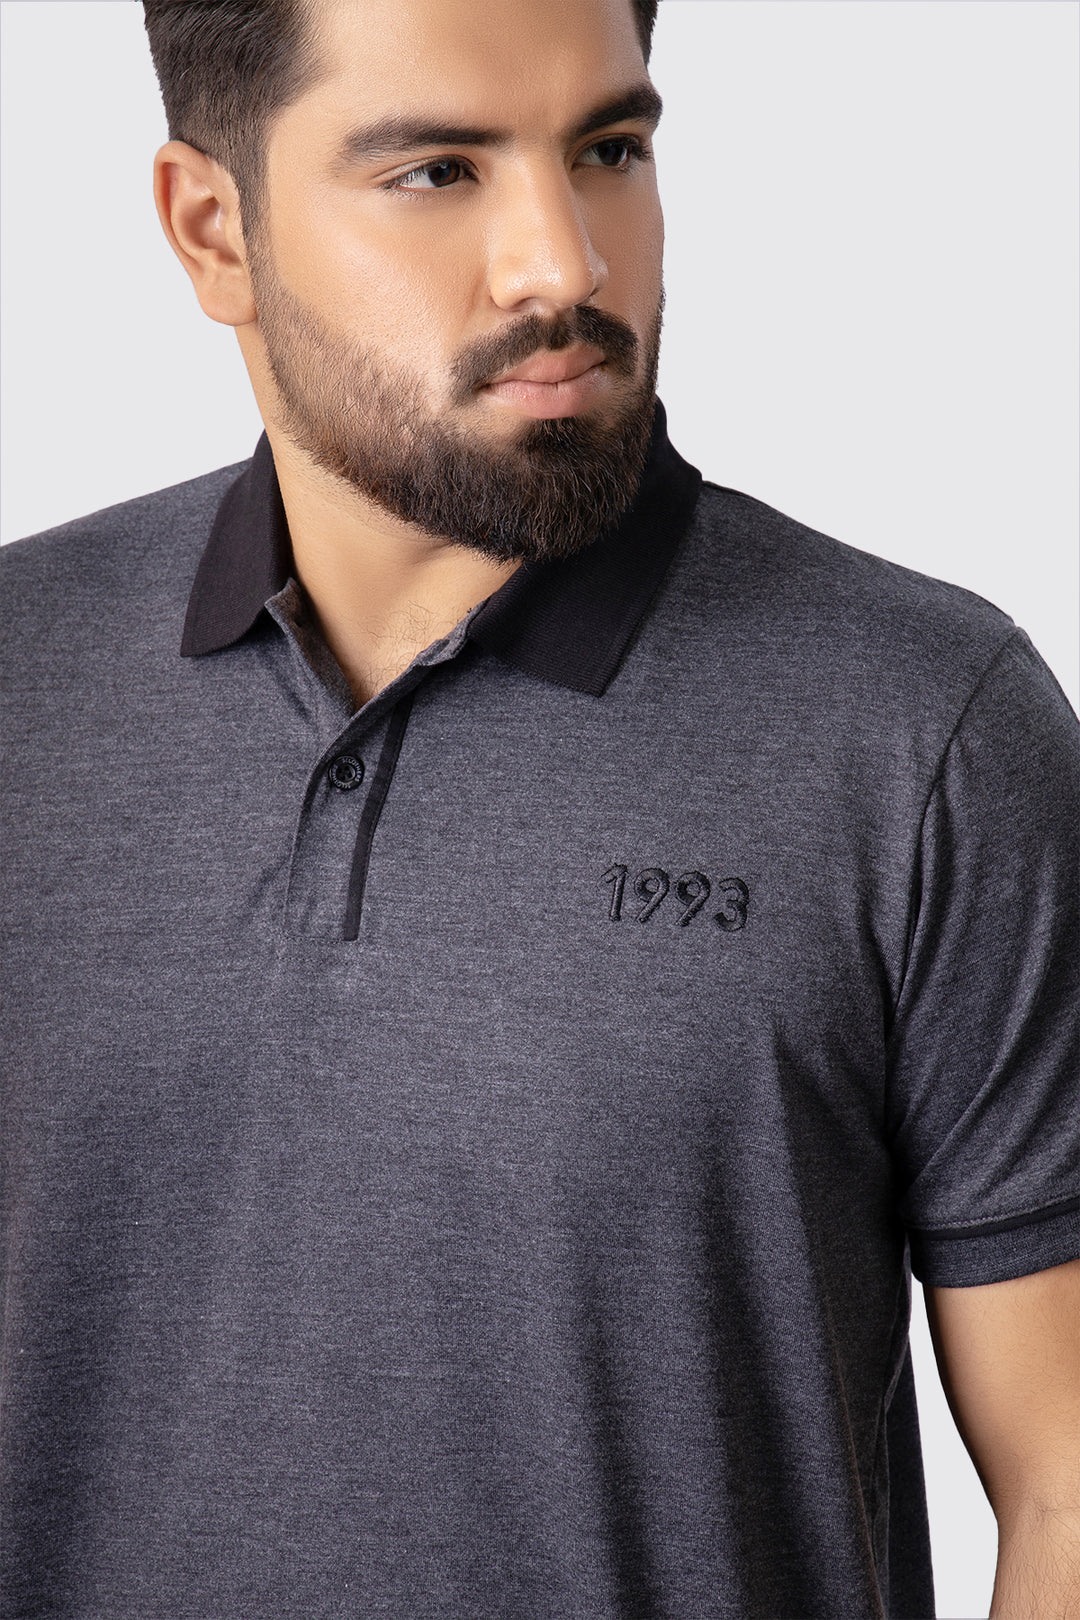 Charcoal Melange Contrast Embroidered Polo Shirt (Plus Size) - A23 - MP0210P